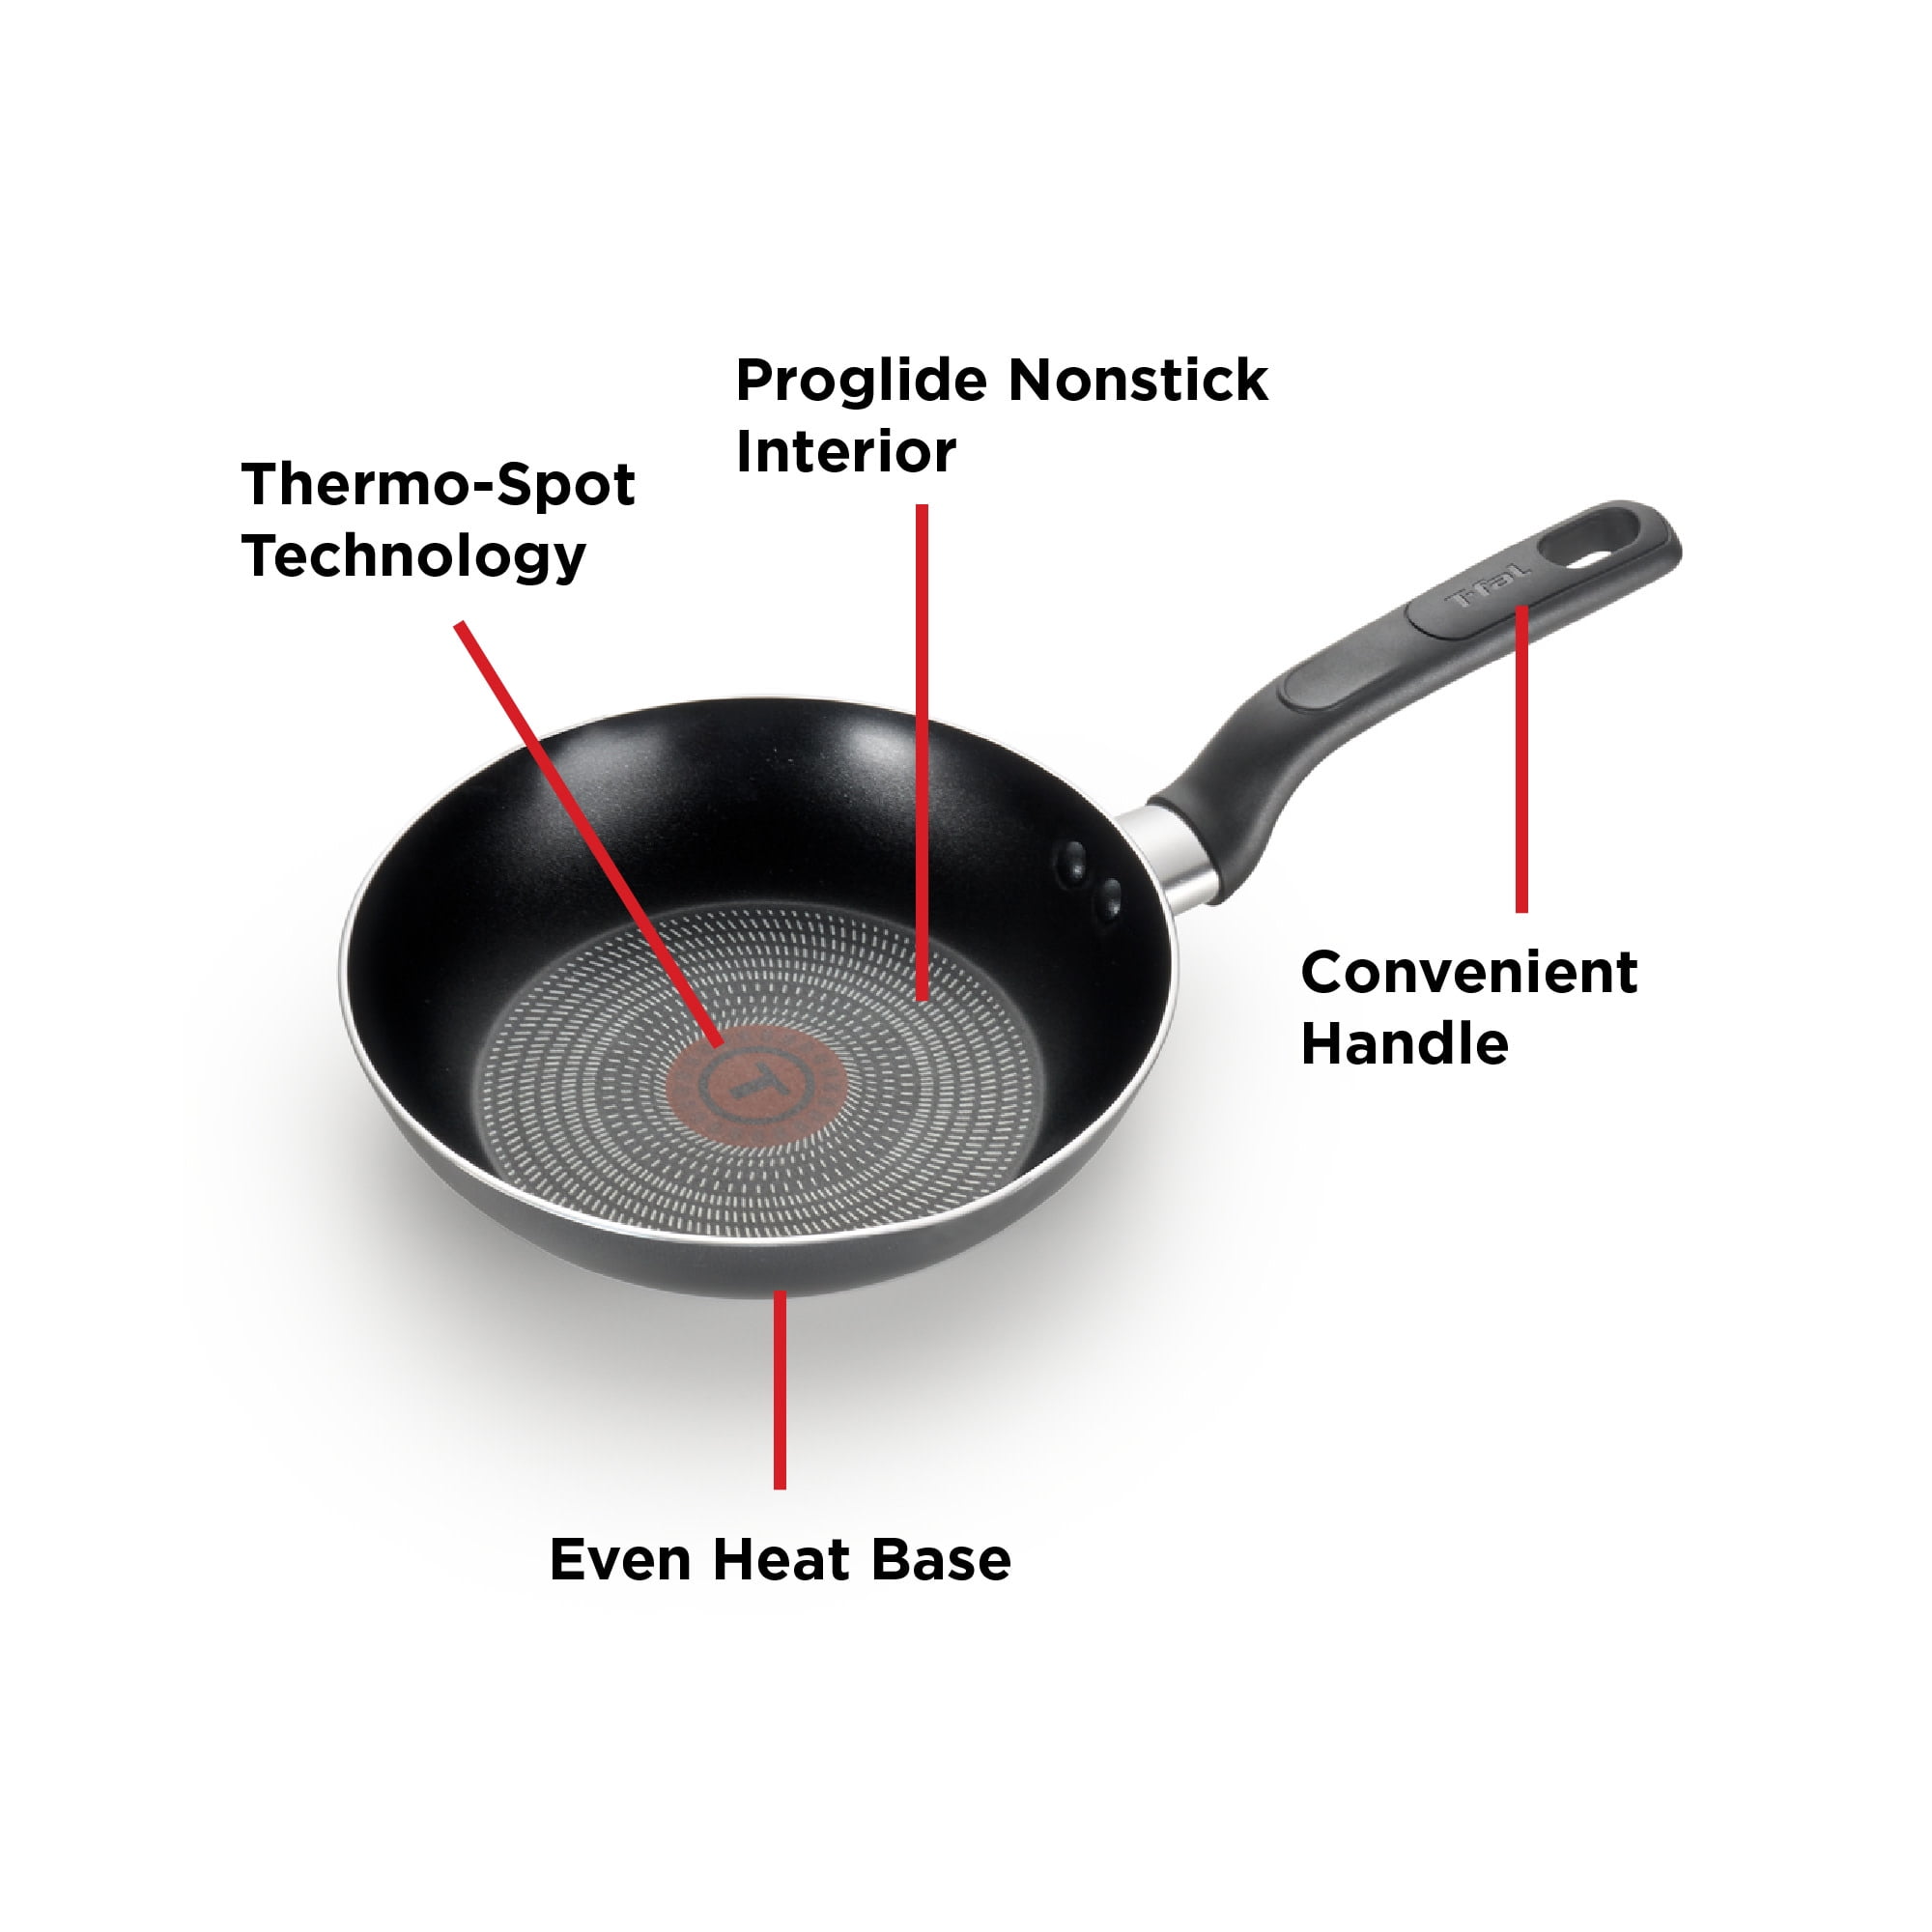 T-fal Advanced Nonstick Fry Pan 8 Inch , Pots and Pans, Dishwasher Safe  Black.